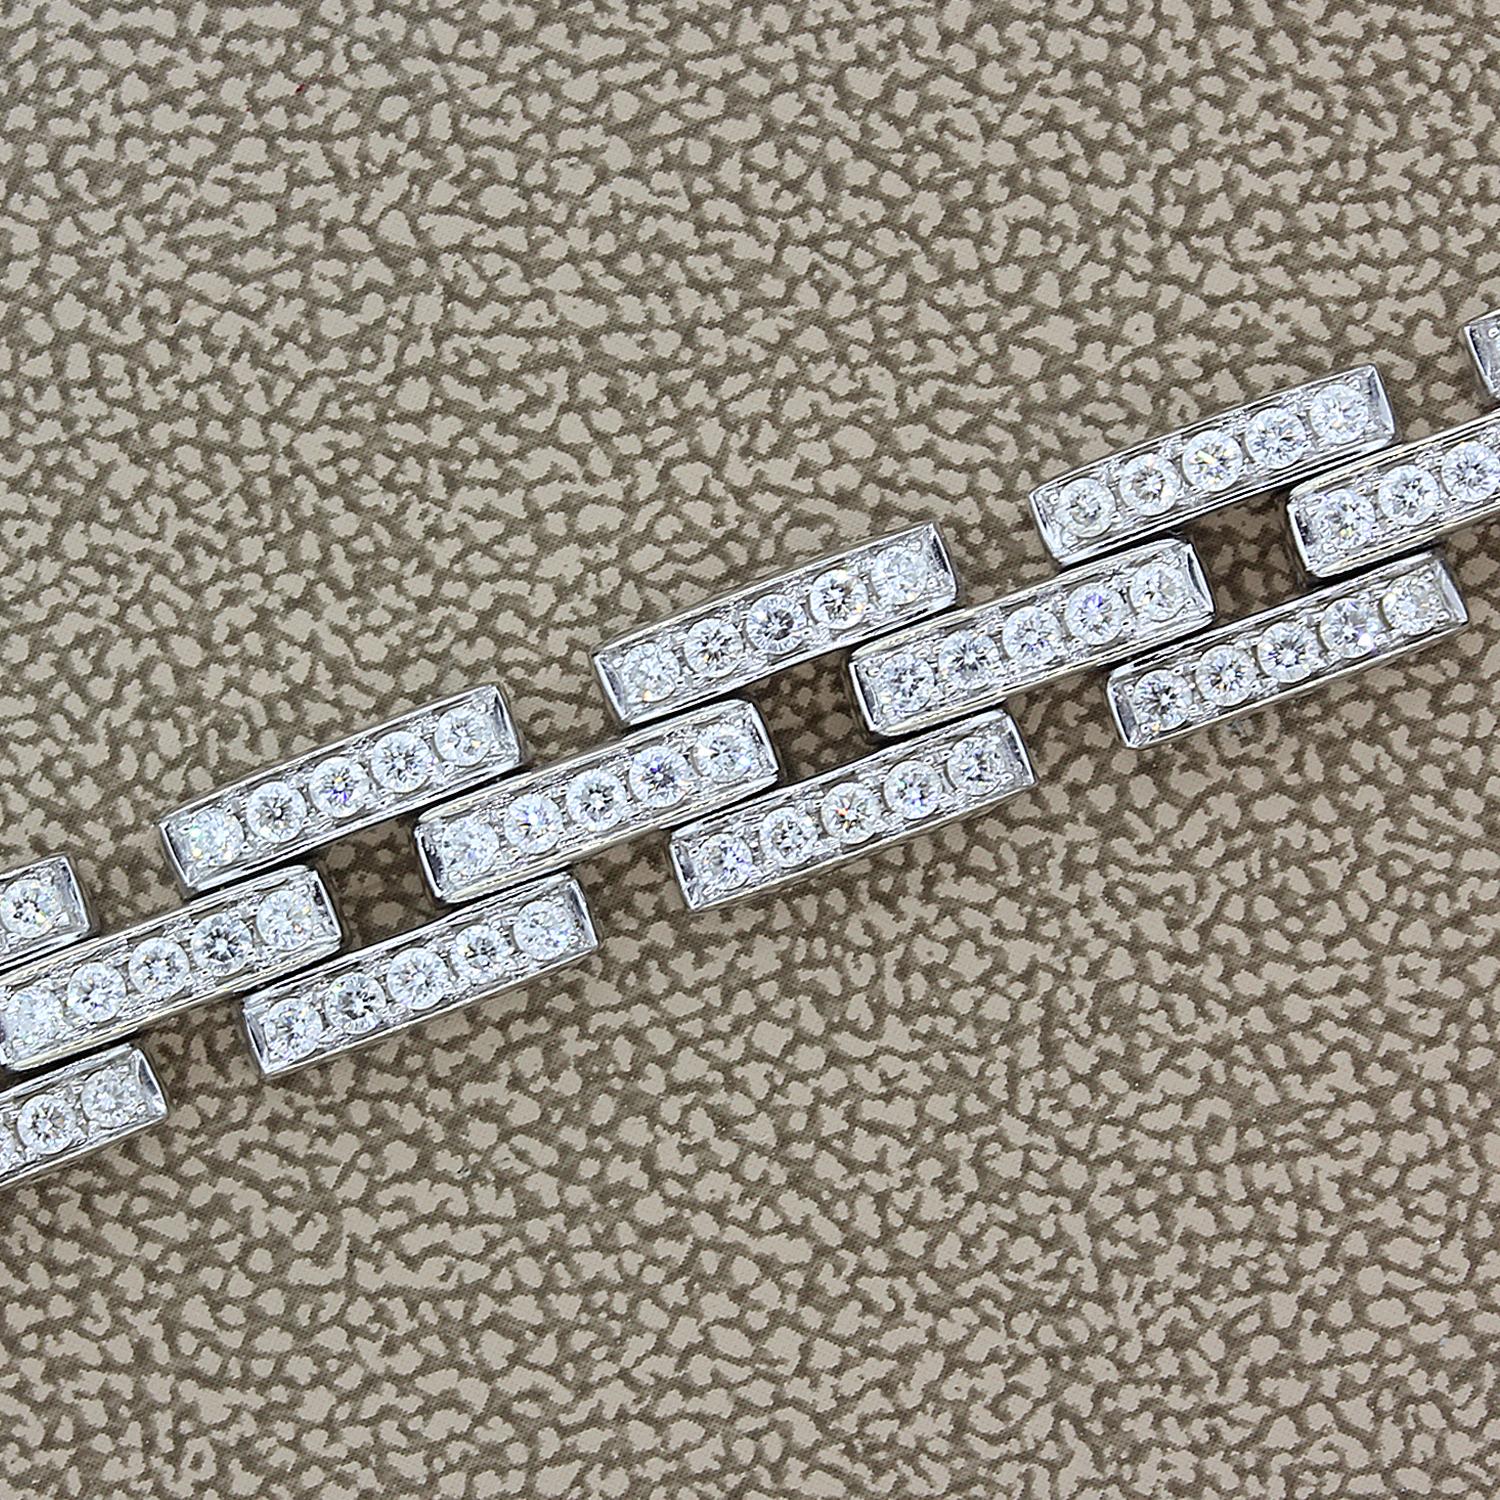 A fabulous diamond link bracelet featuring 3.80 carats of VS quality round cut diamonds which are set in 18K white gold links. A quality made bracelet that can be worn day to day or dressed up for a dinner party. 

Length: 7 ½ x 0.40 inches 
